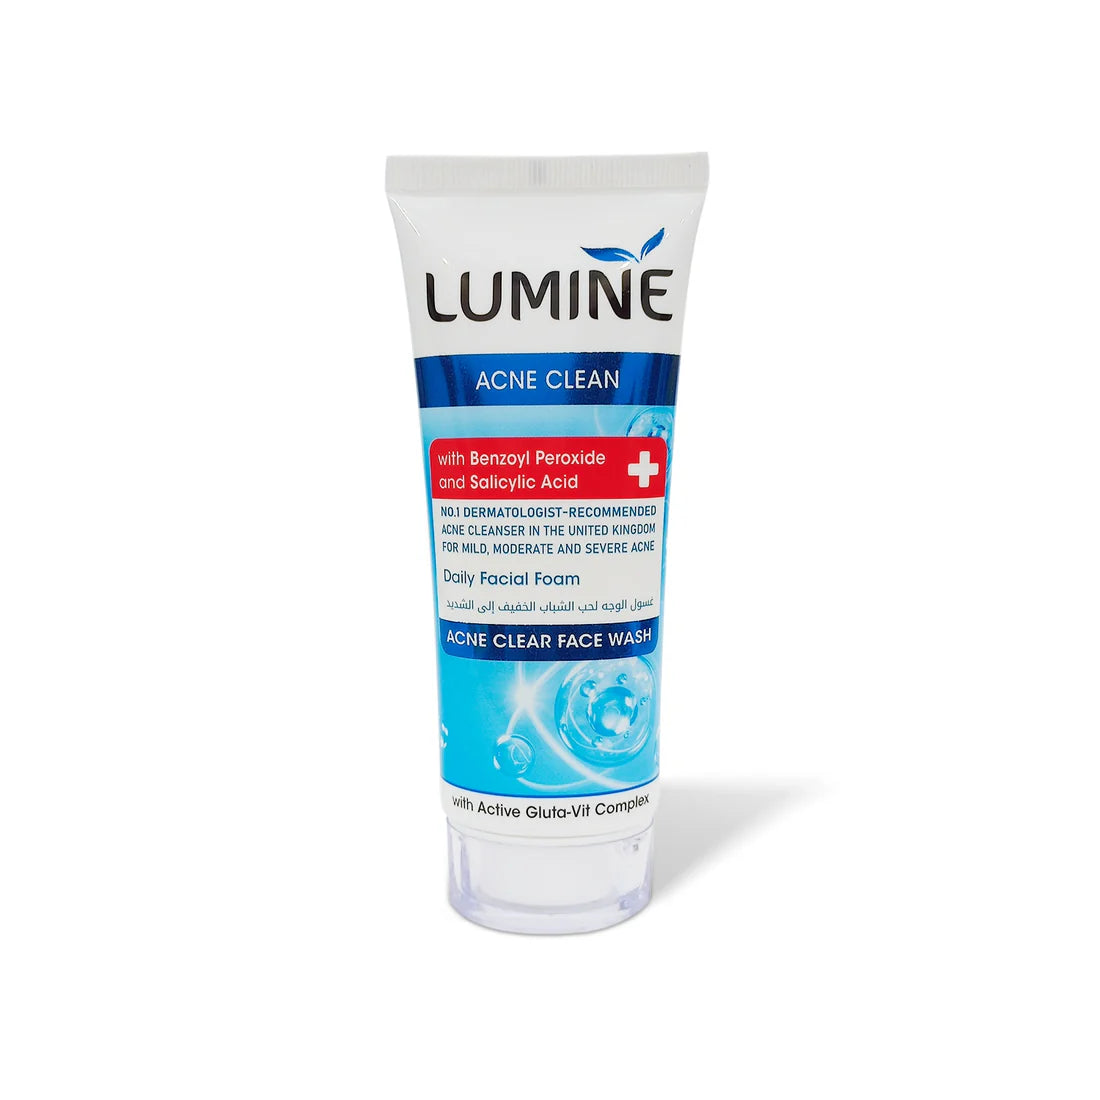 Lumine Acne Cleaning With Active Fluto Vit Complex Face Wash